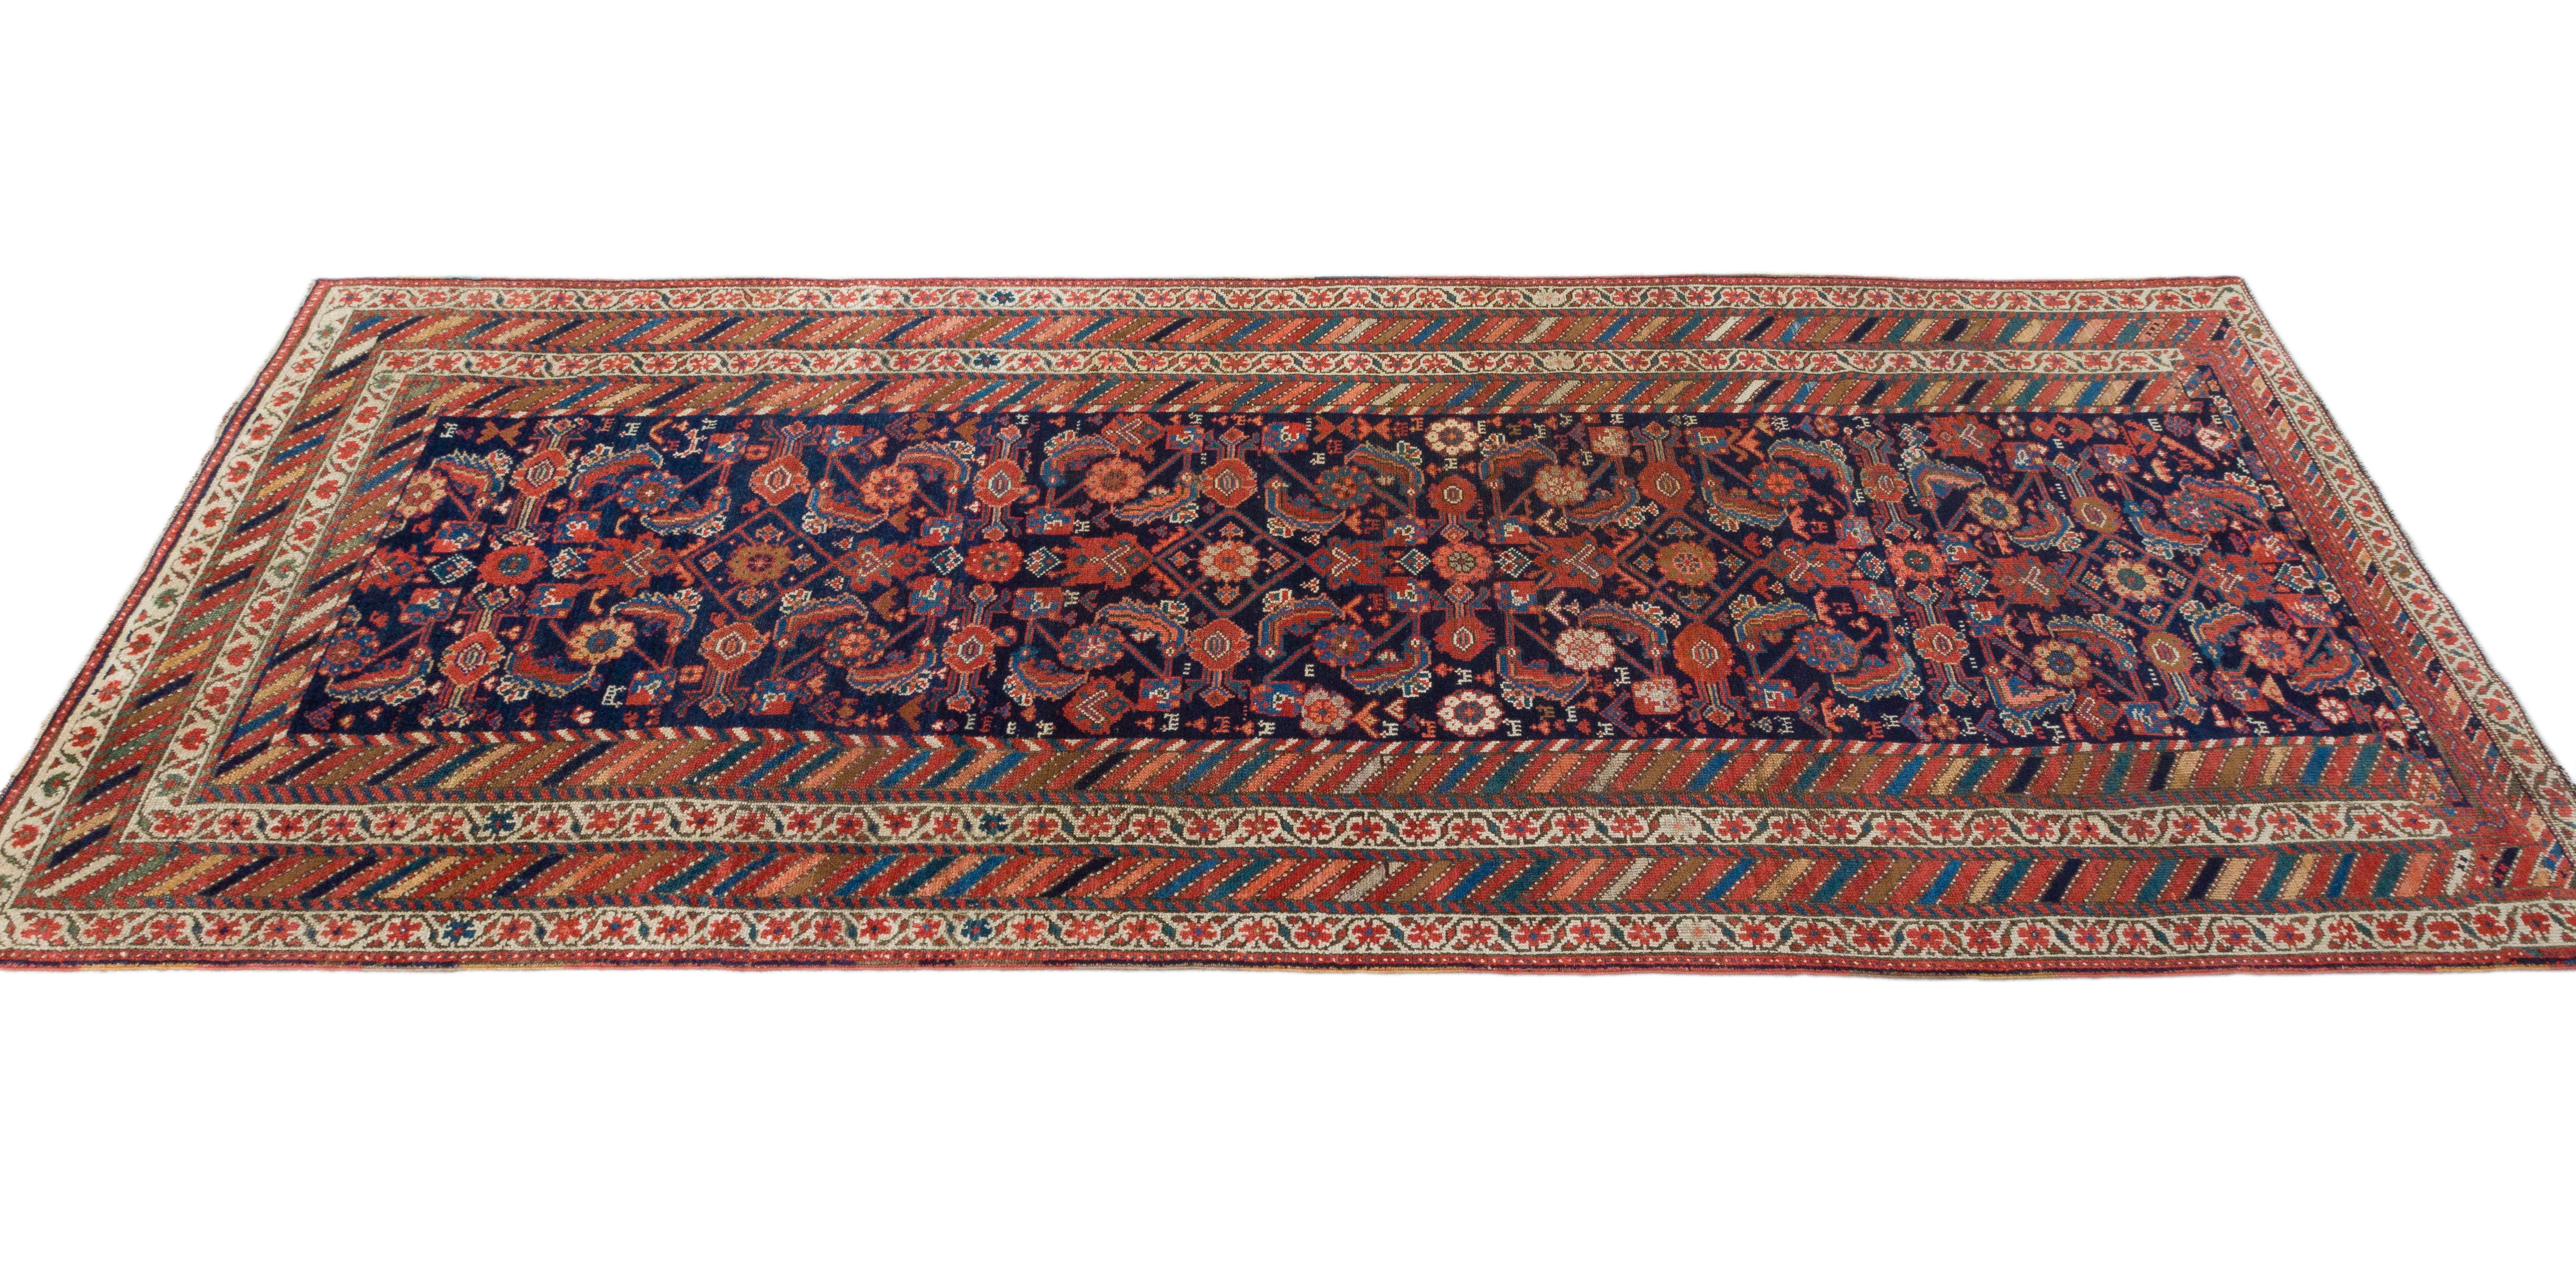 Early 20th Century Antique Persian Runner For Sale